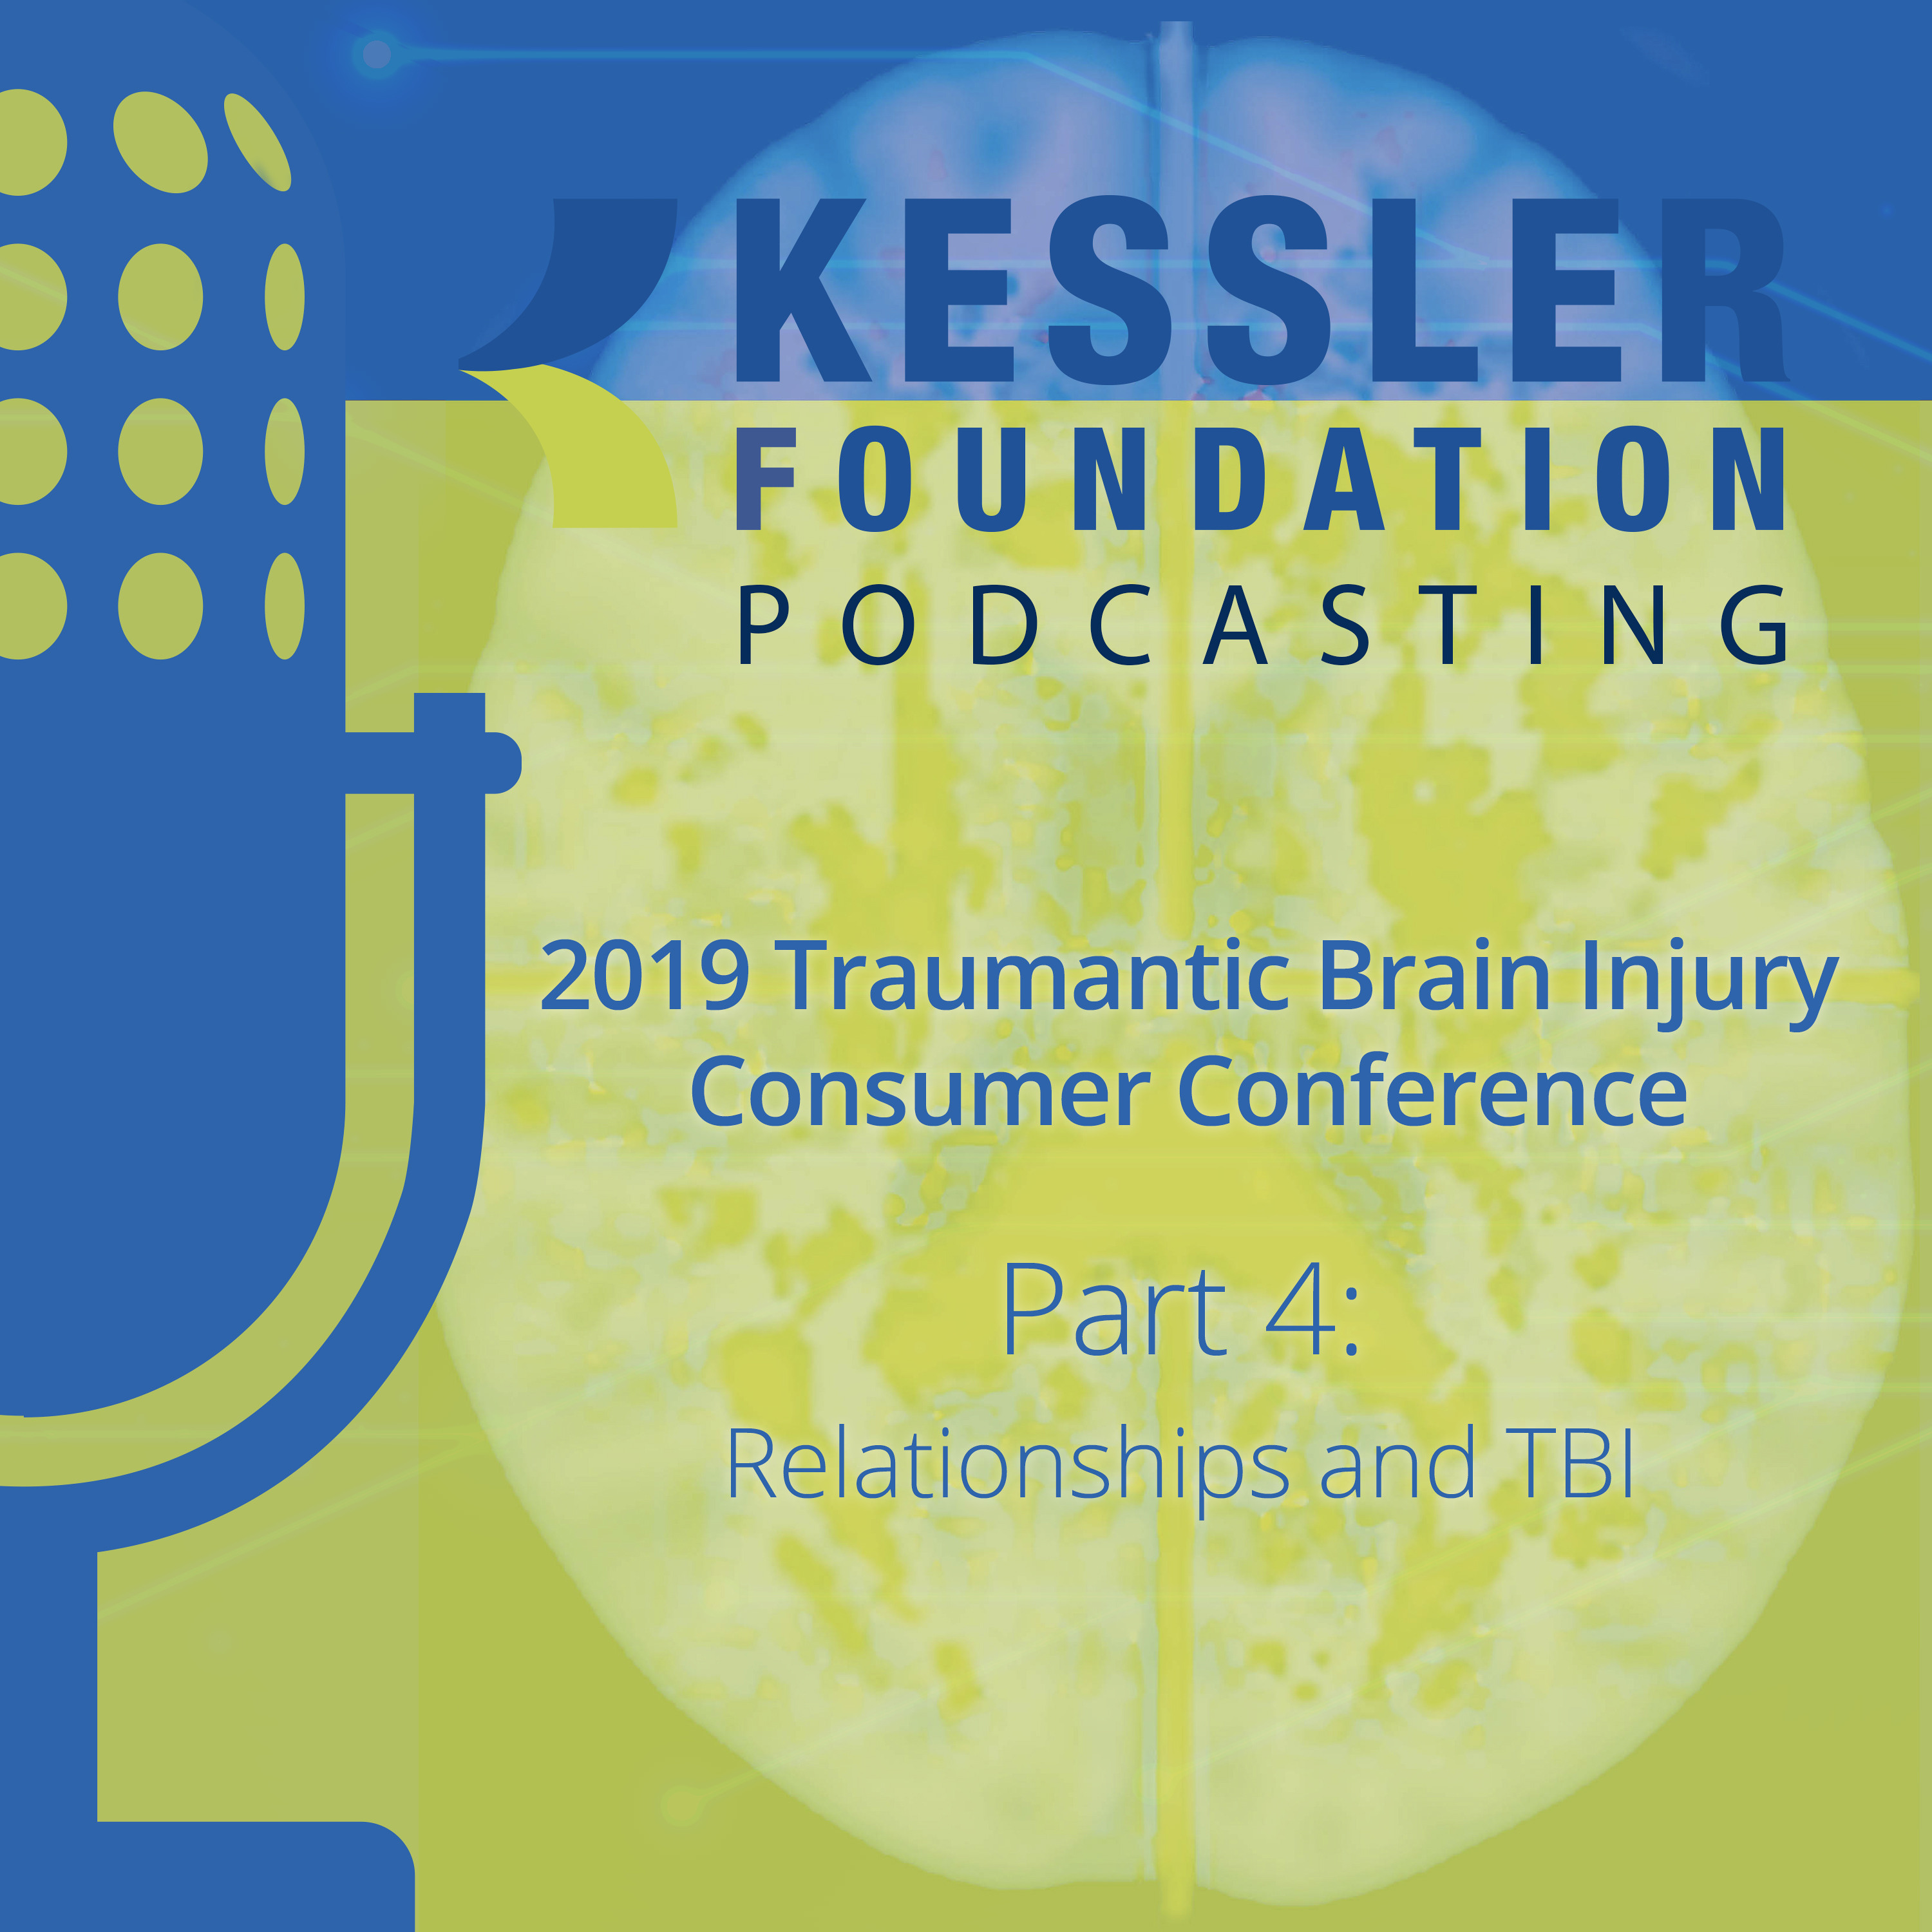 Mike-at-the-Mike - “Relationships and TBI” Part 4 of 6